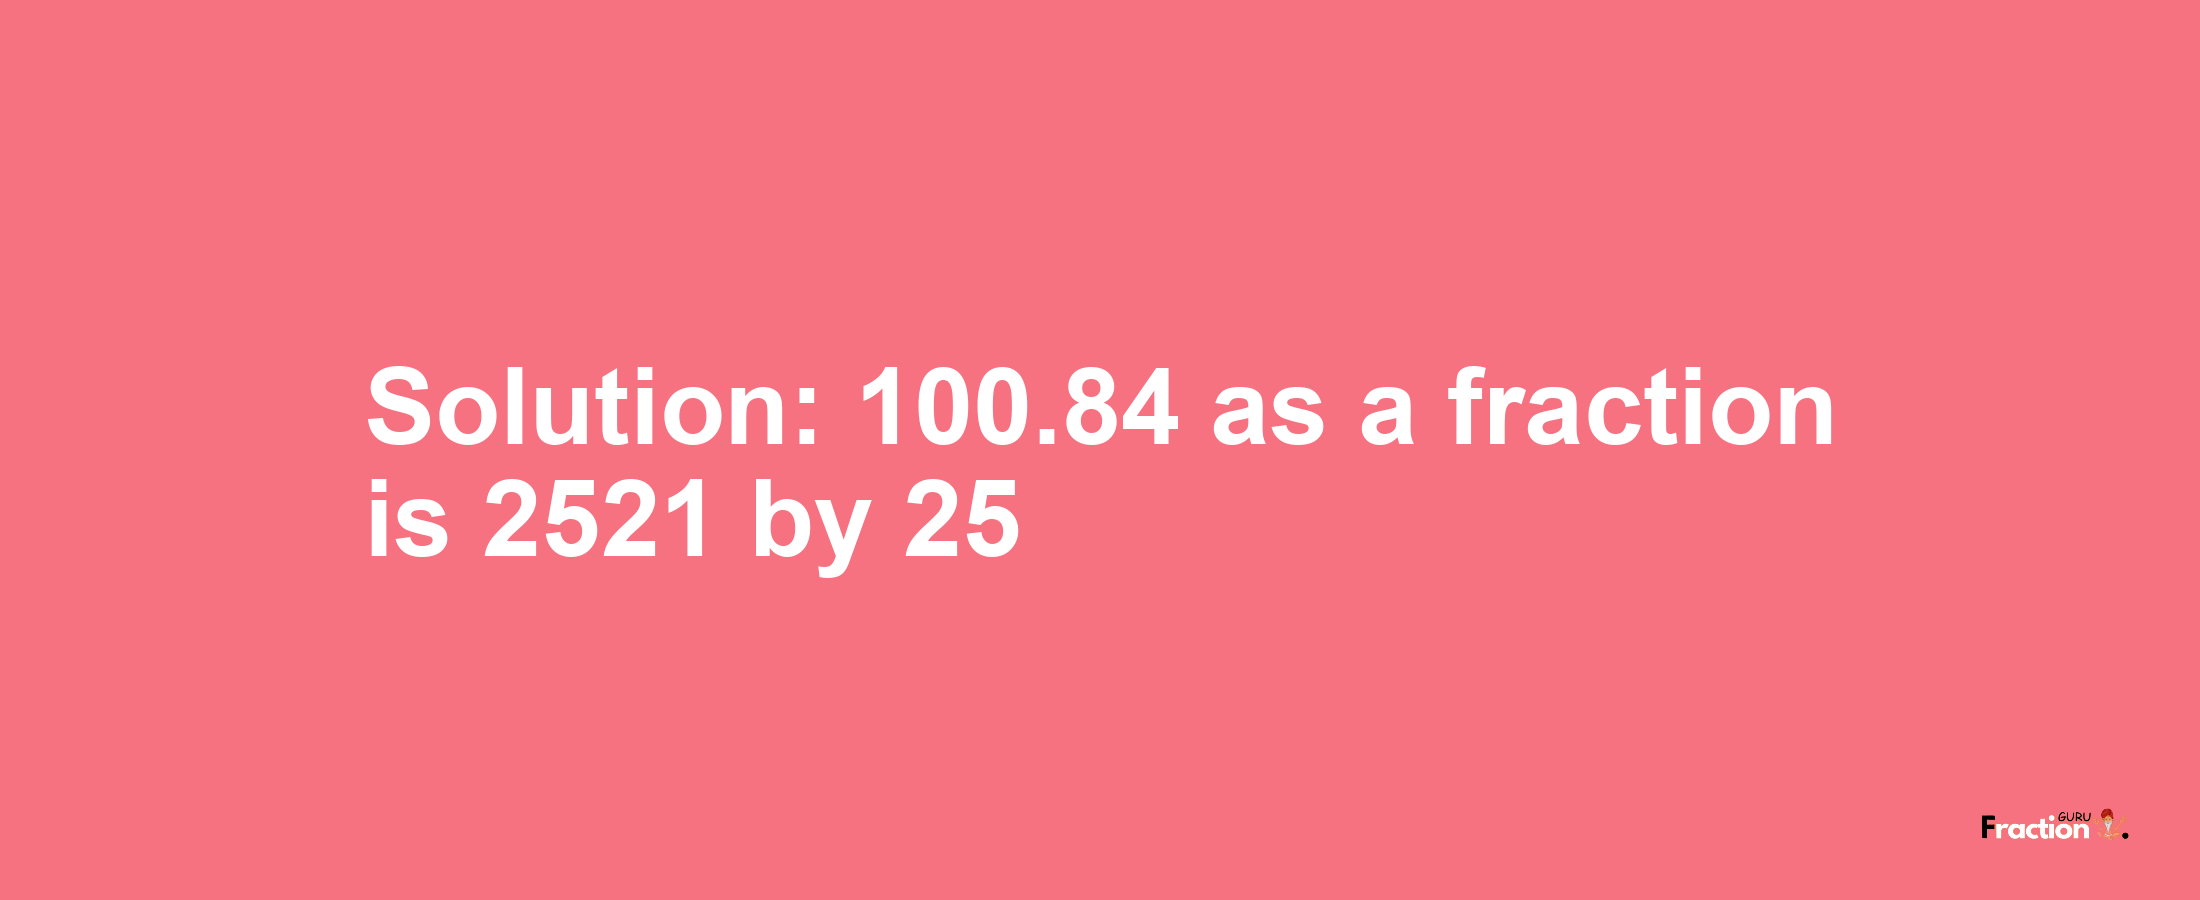 Solution:100.84 as a fraction is 2521/25